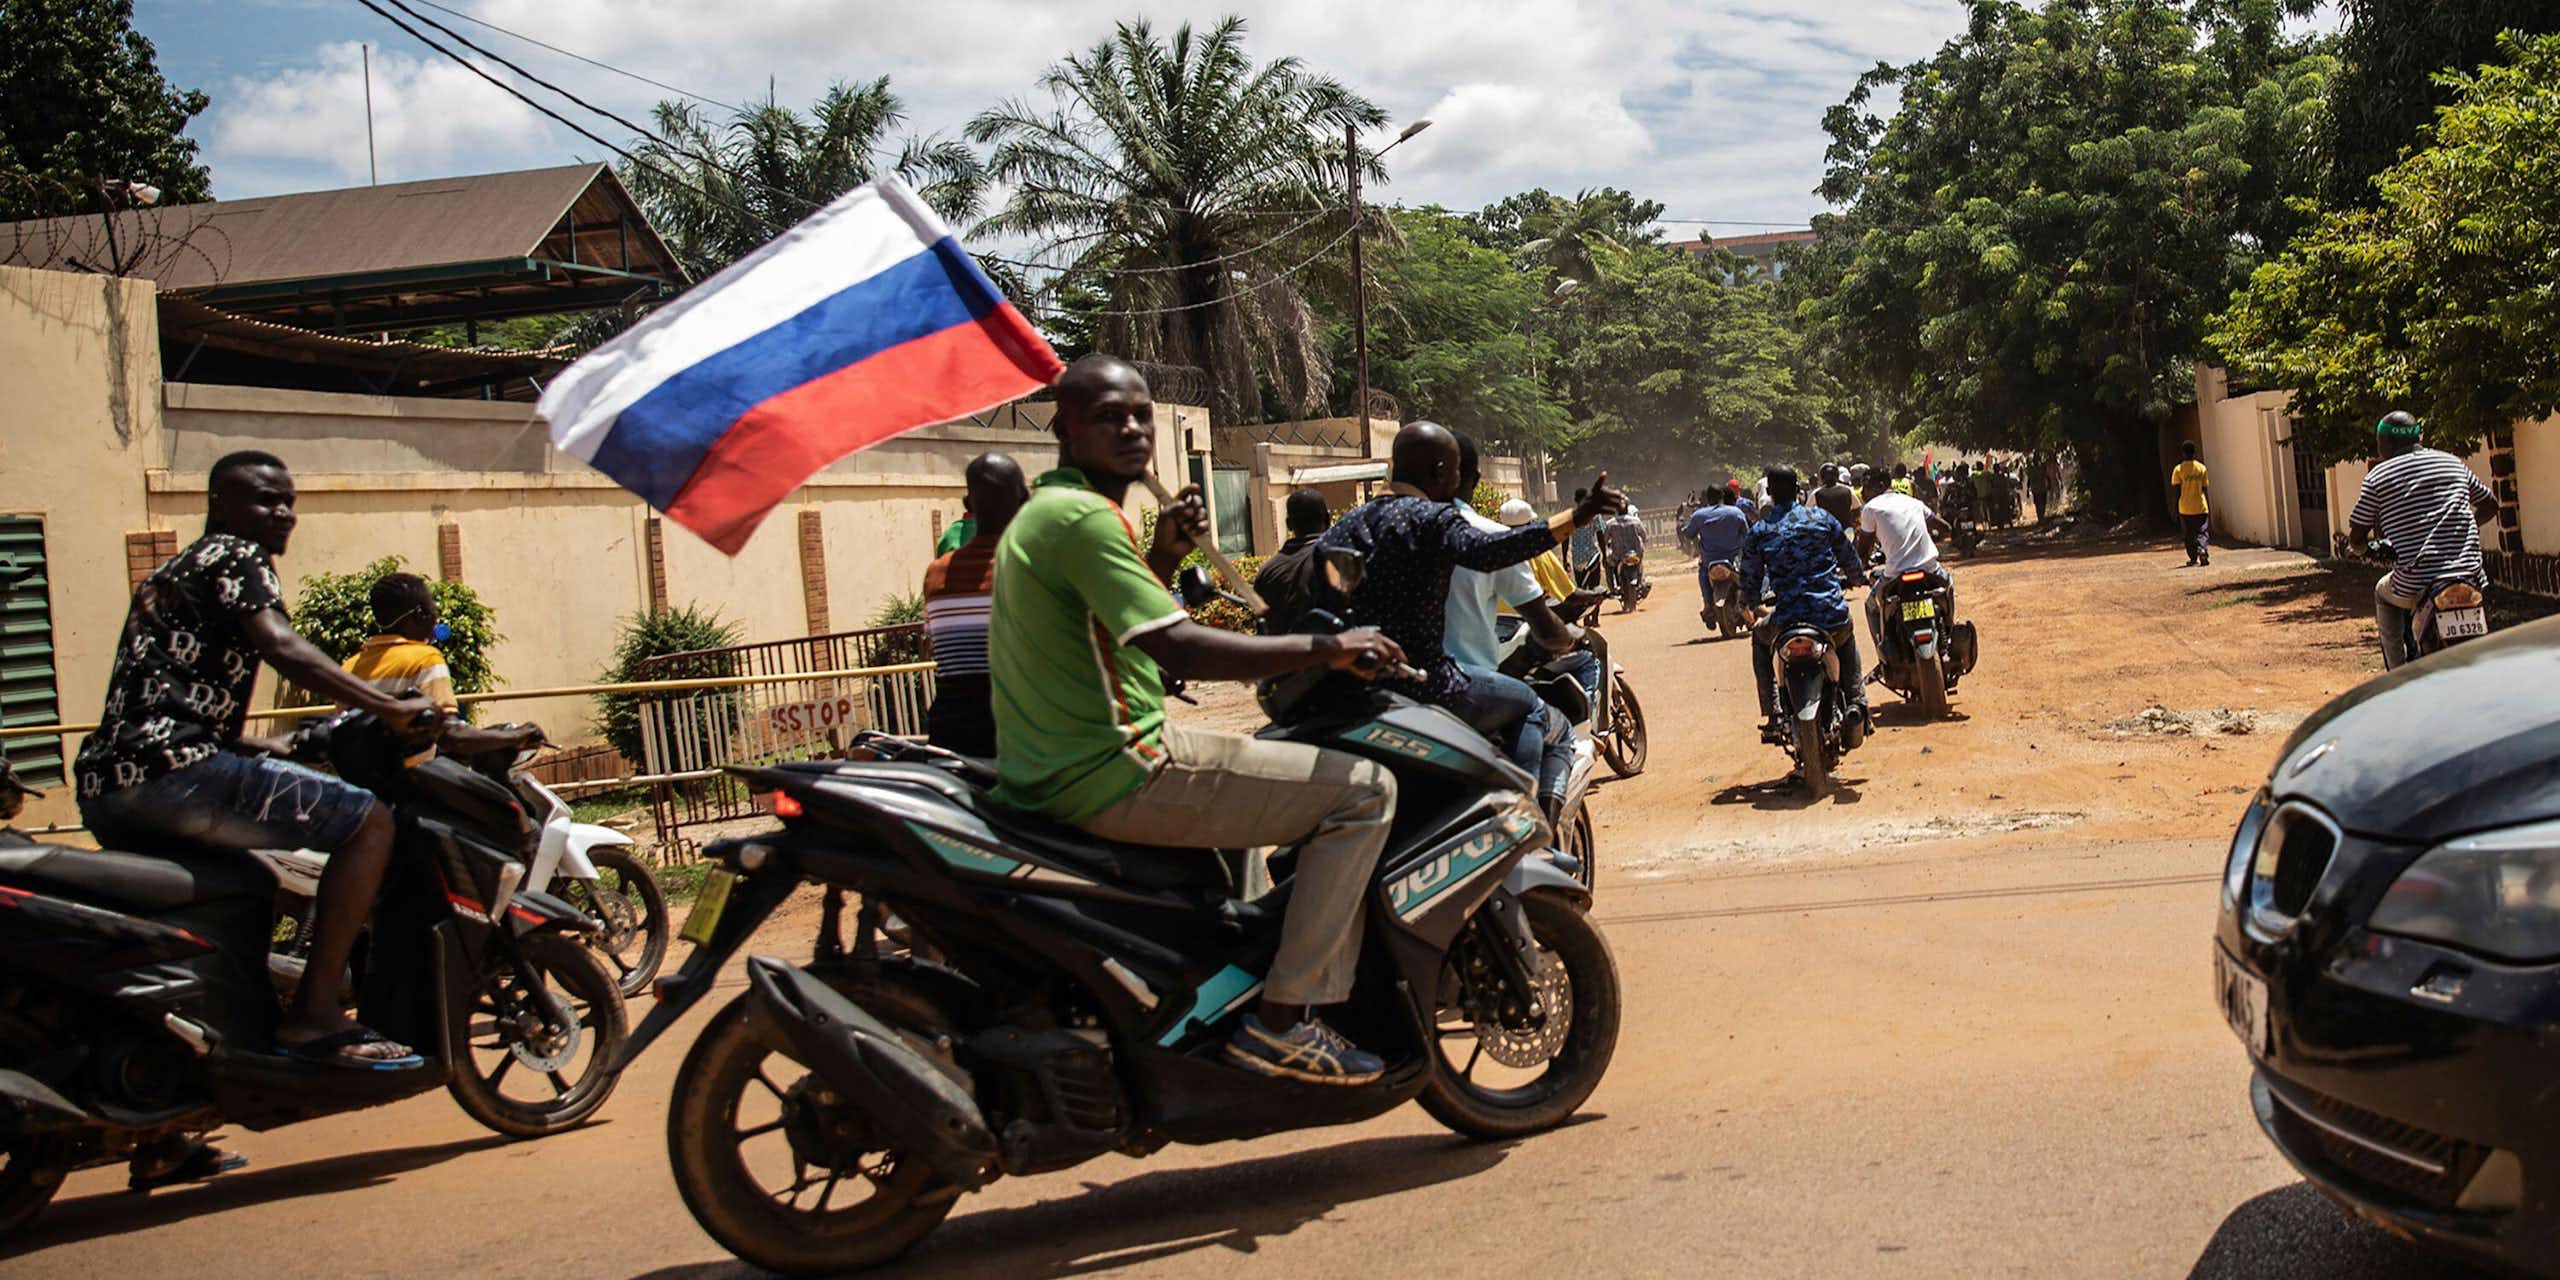 A group of men on motorbikes driving through a dusty street holding a Russian flag.